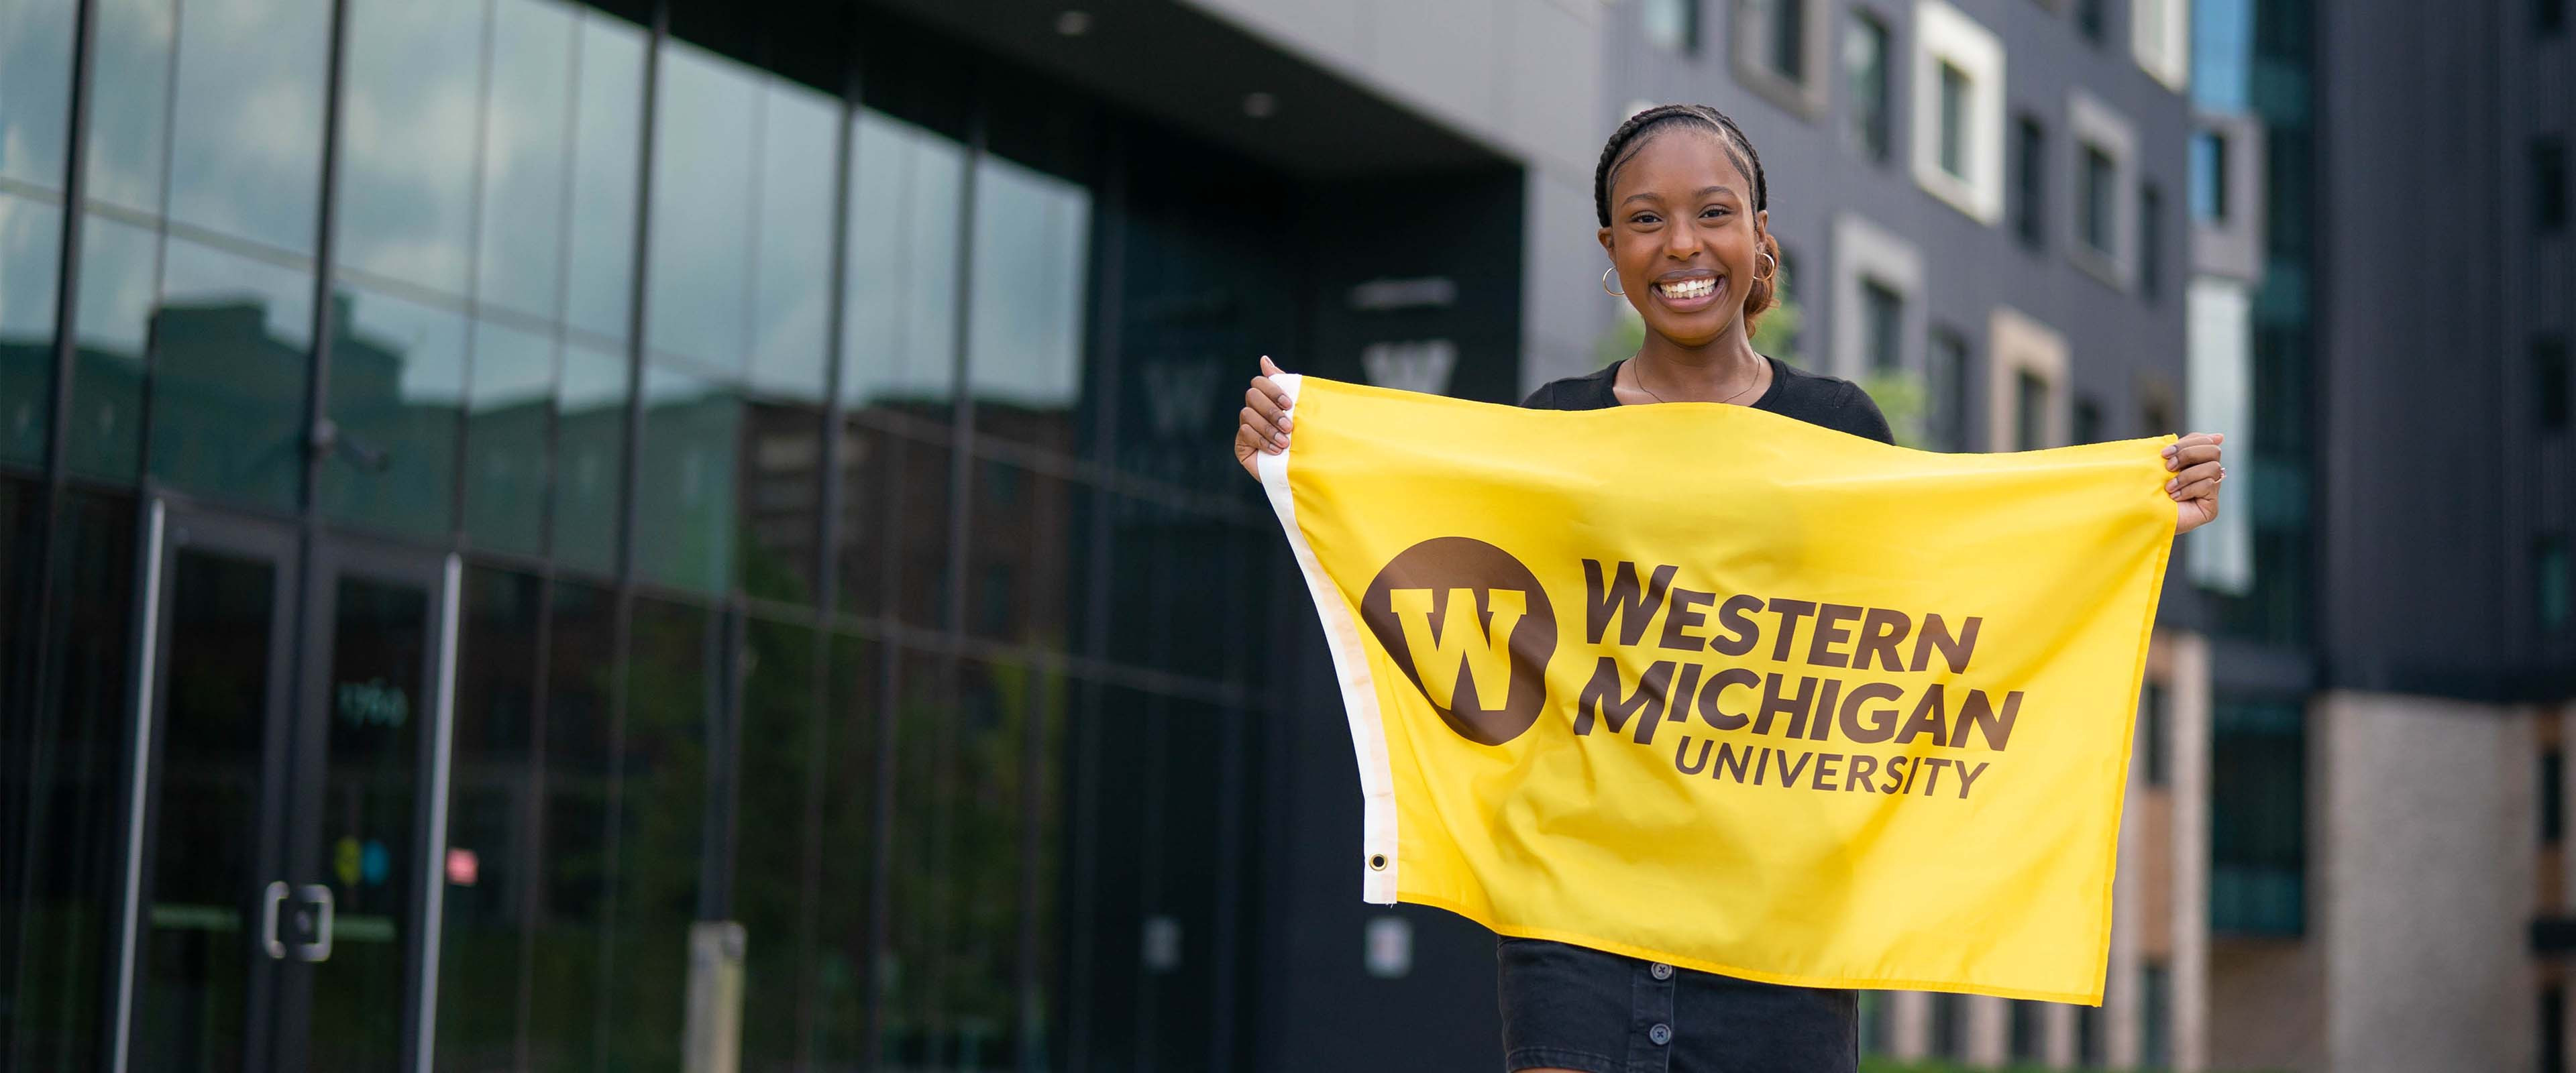 A student holding a Western Michigan University flag.